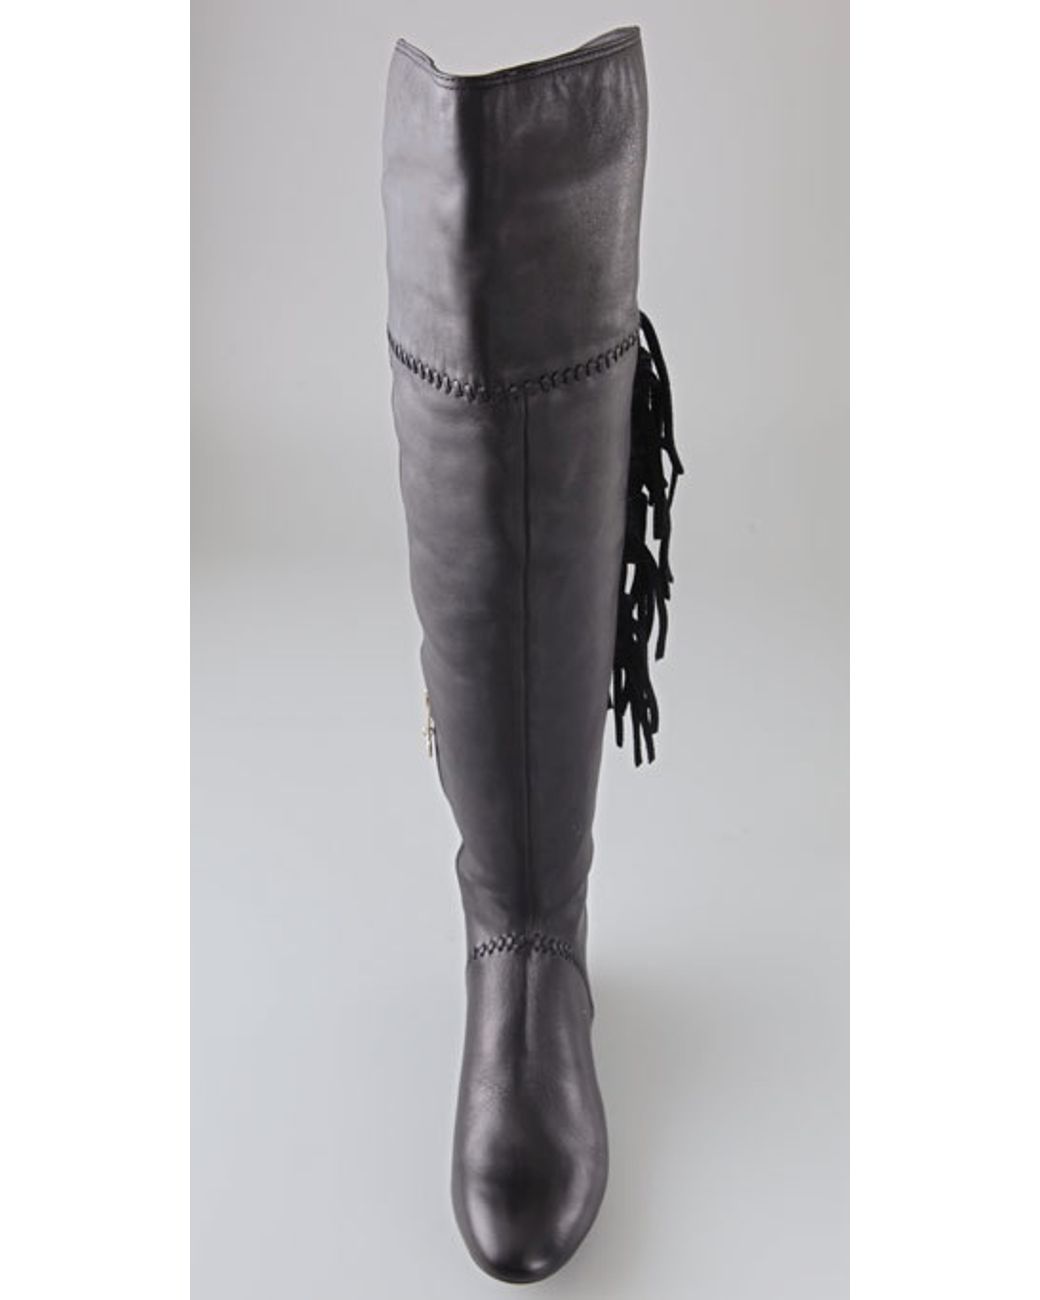 House of Harlow 1960 Tessa Fringed Over The Knee Boot in Black | Lyst